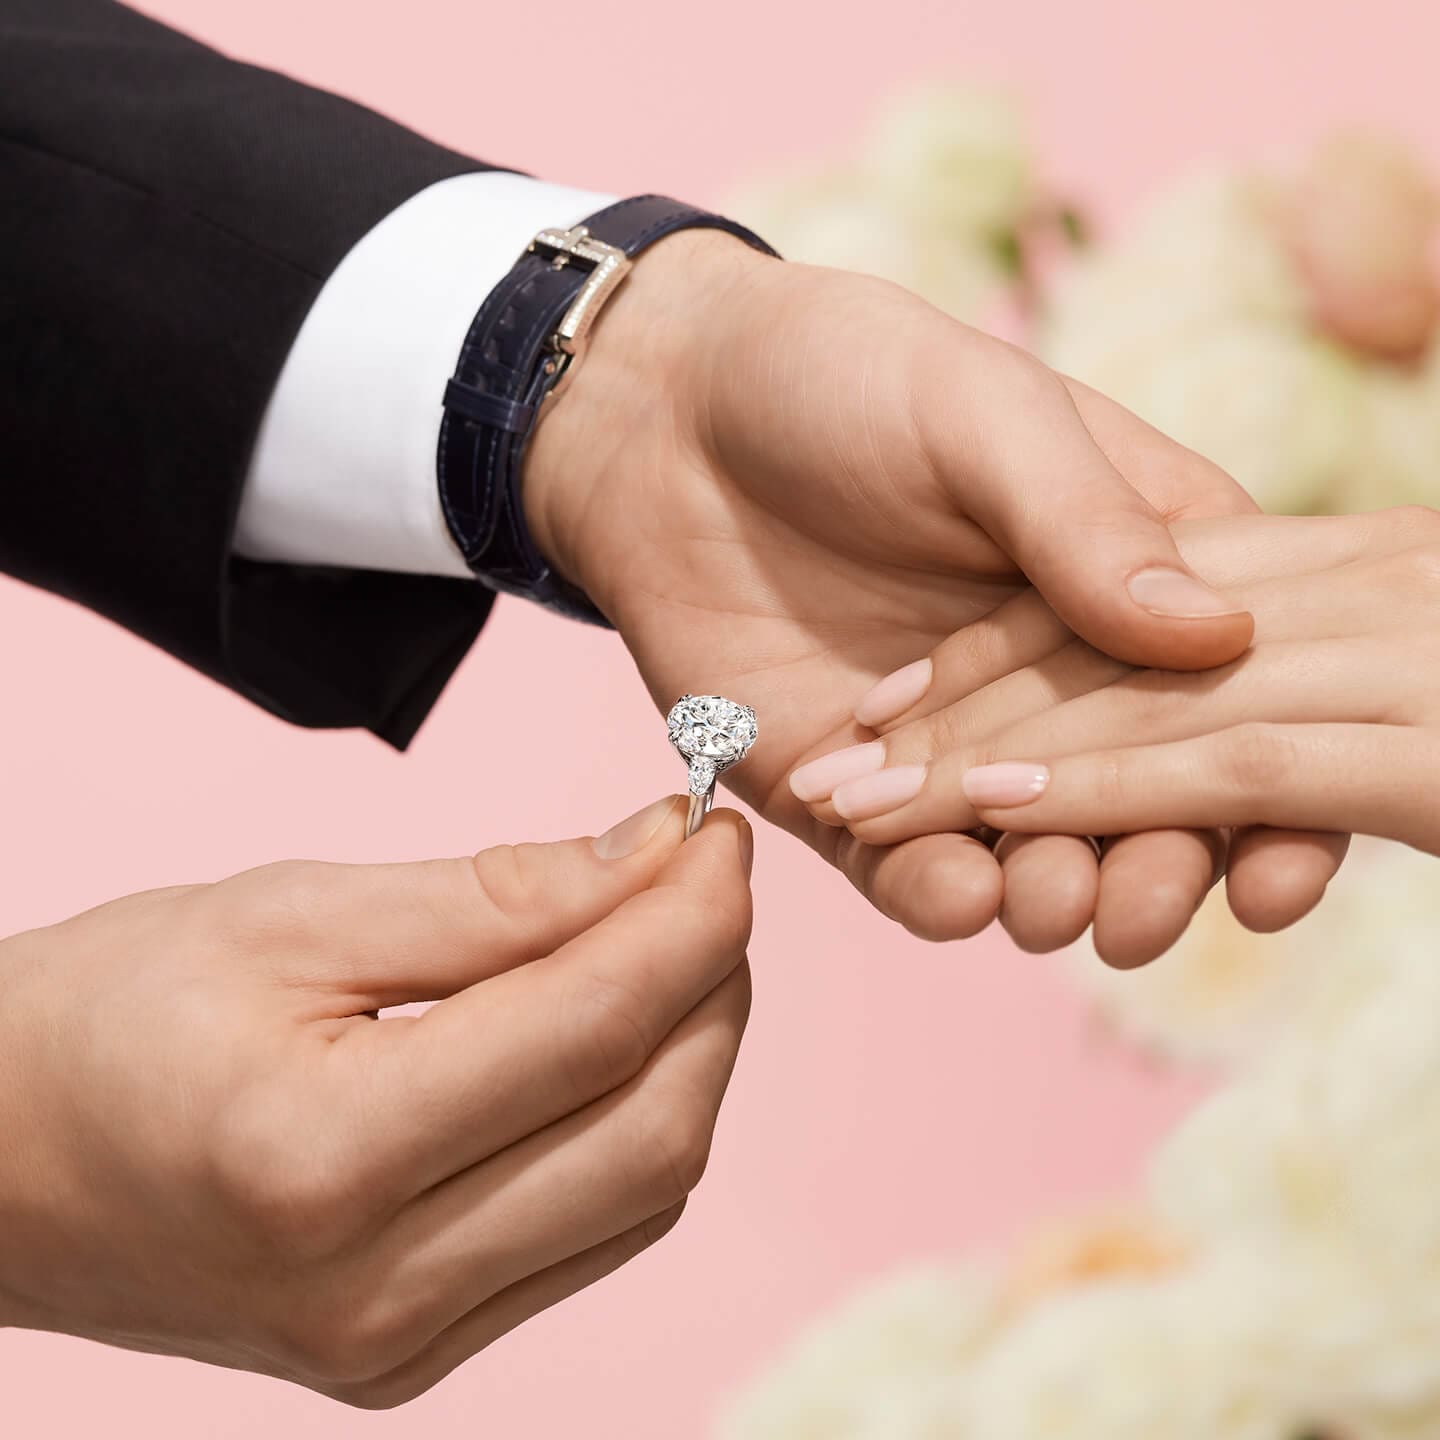 Male placing Diamond Engagement Ring on female hand